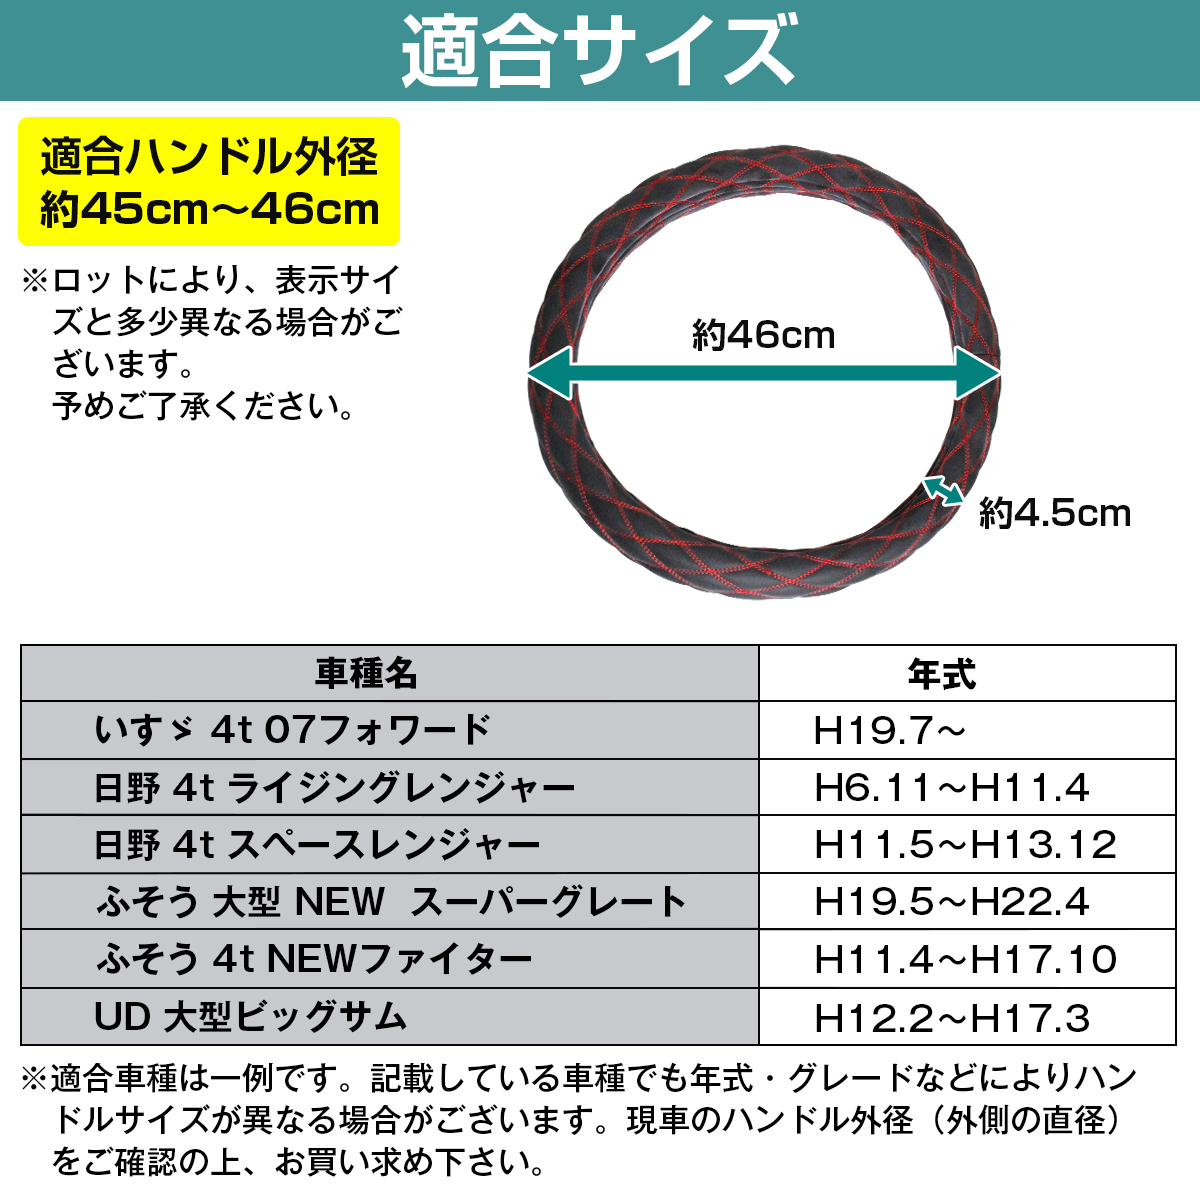 n back style s.-do double stitch diamond cut steering wheel cover black × red thread L size Fuso large Blue TEC s super grade 